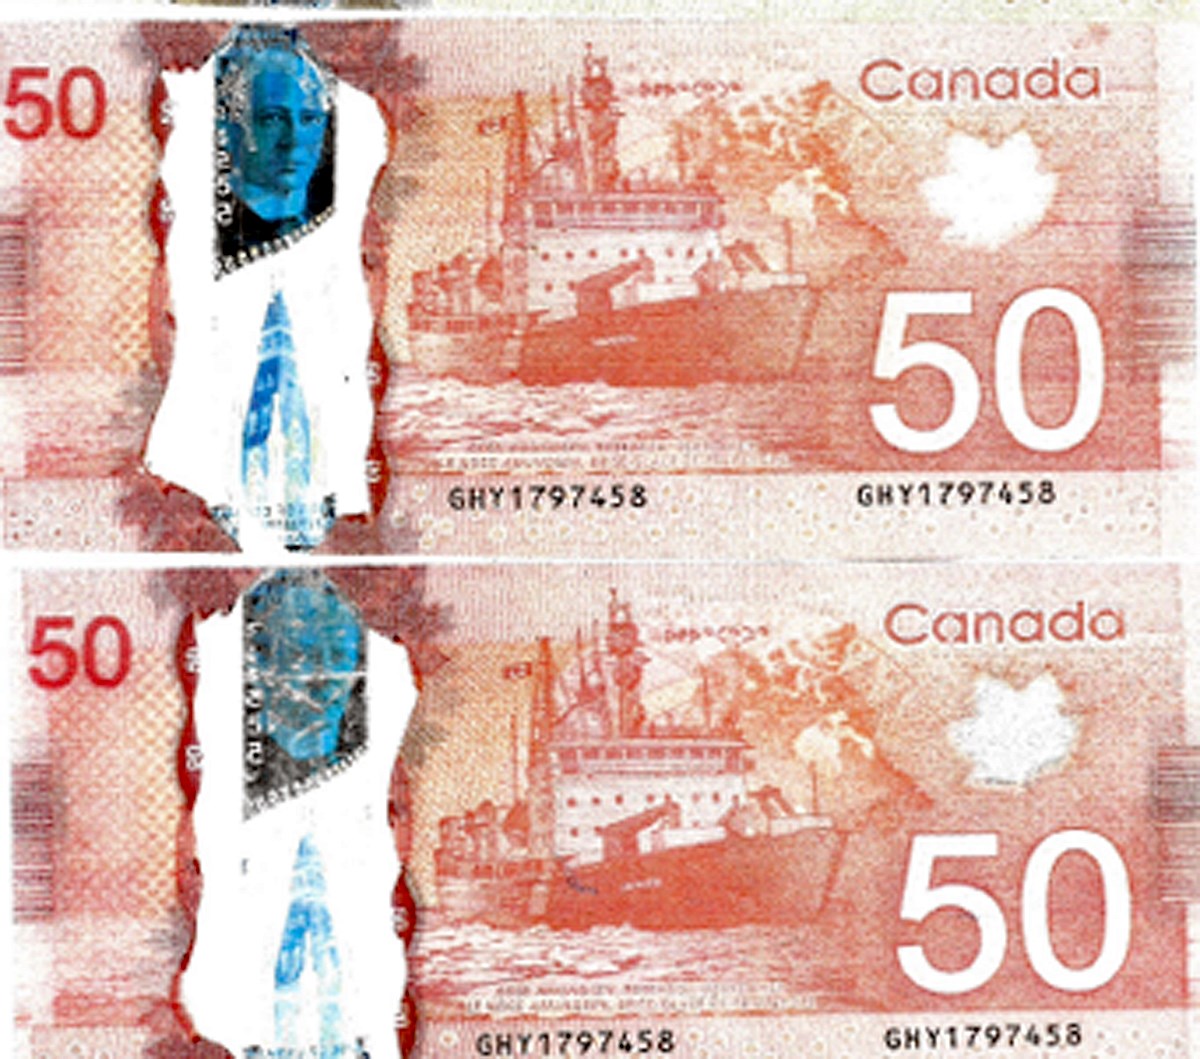 RCMP issue counterfeit currency warning for Central Alberta